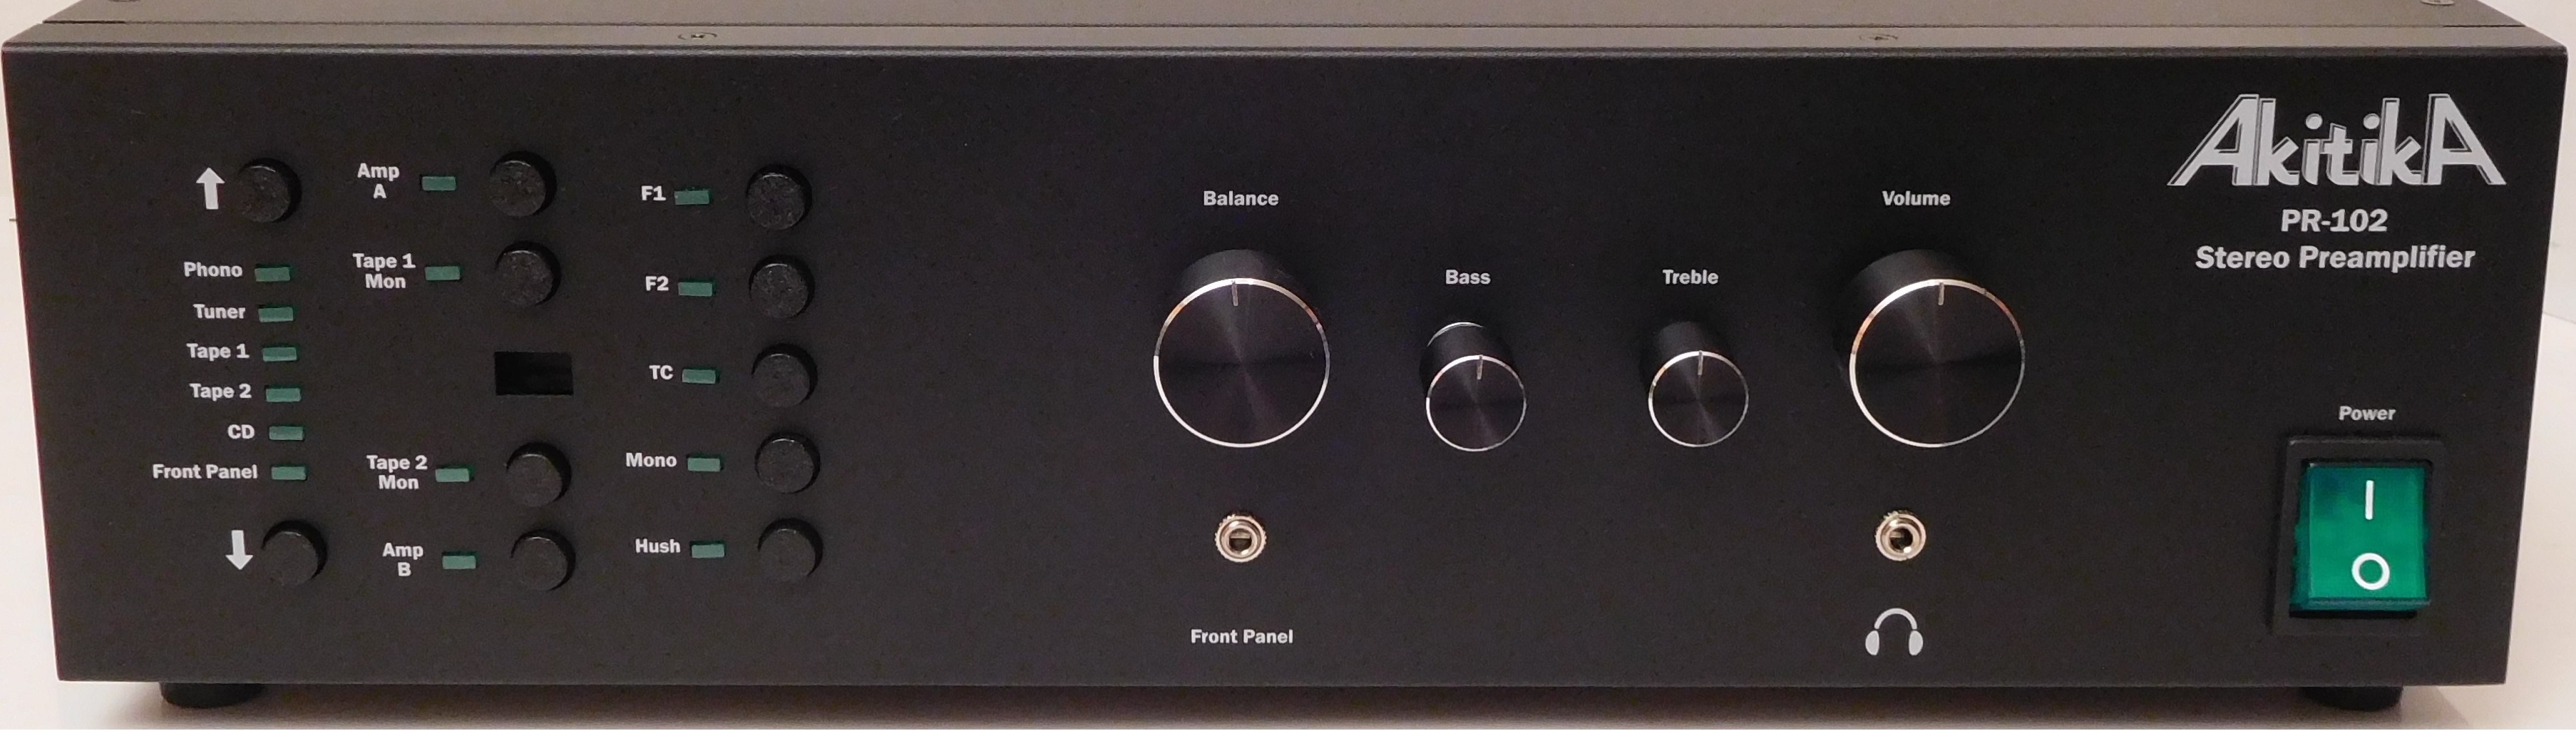 PR-102 Stereo Preamplifier, 2021 version, black, front view